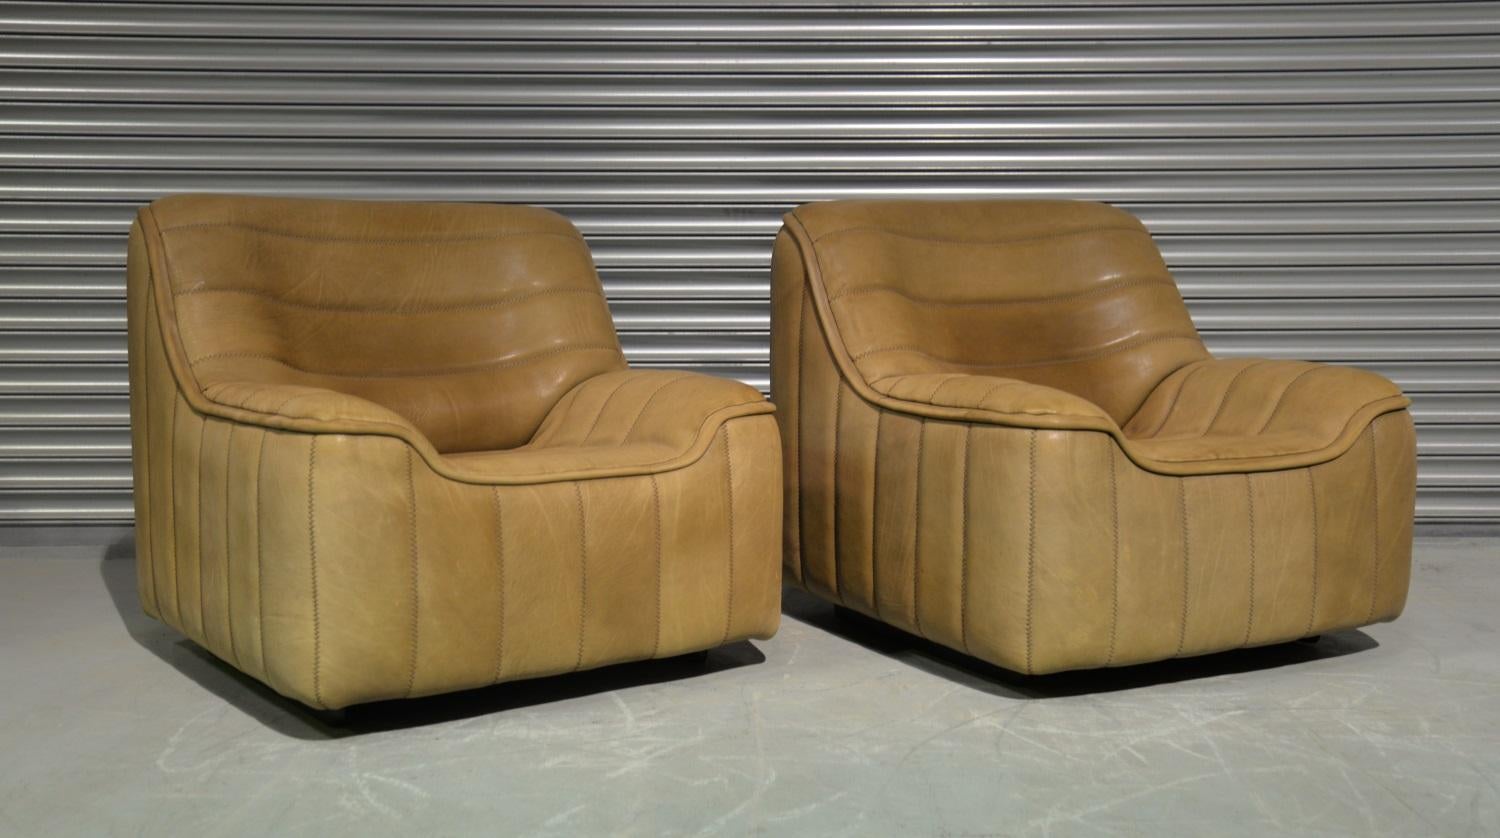 We are delighted to bring to you a pair of ultra rare vintage De Sede DS 84 armchairs. Hand built in the 1970s by De Sede craftsman in Switzerland, these pieces are upholstered in thick beige neck leather with superb stitch detail. The pieces are